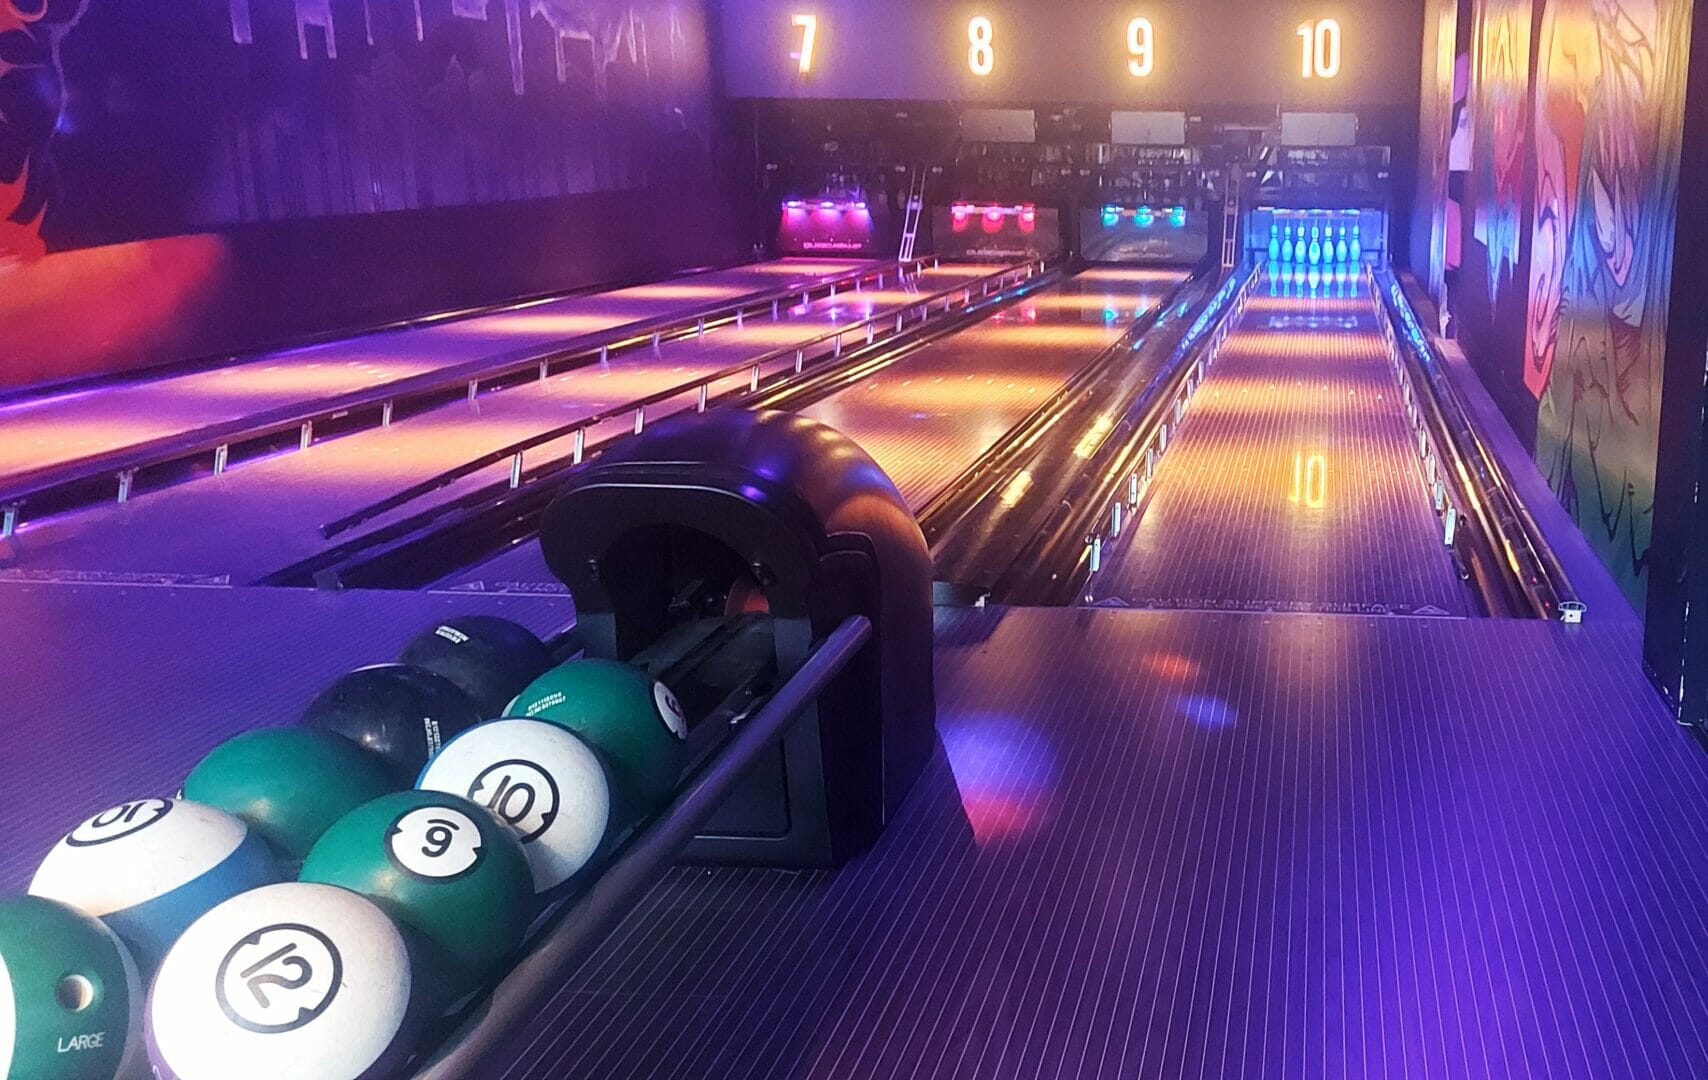 Farrat experience rapid growth in acoustic isolation projects for tenpin bowling alleys as multi-entertainment centres grow.